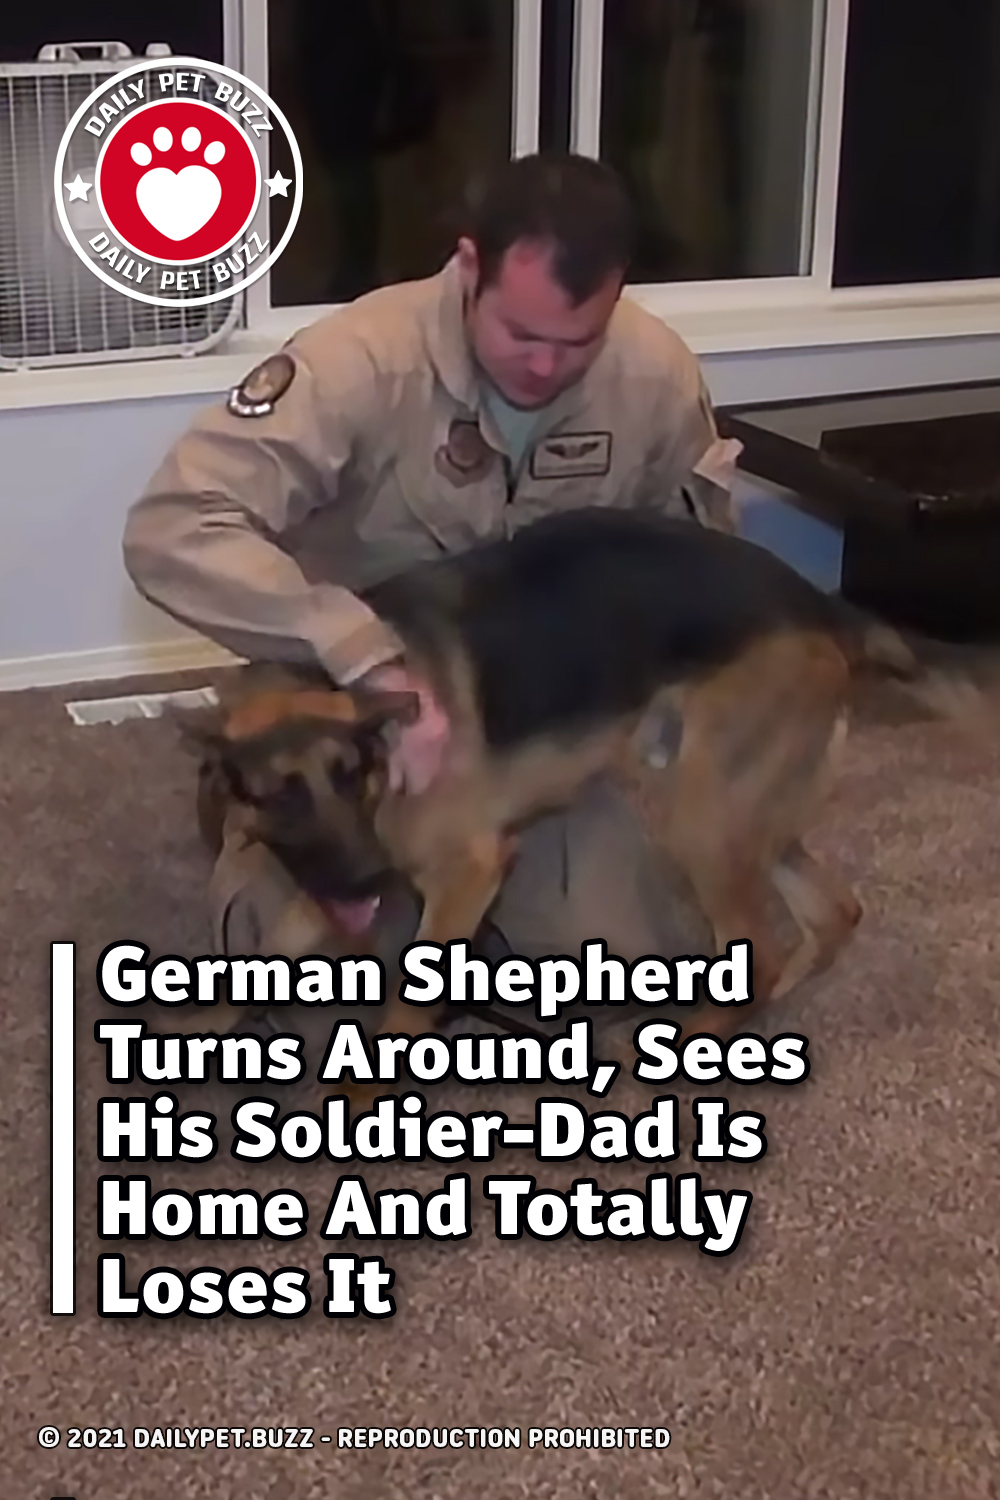 German Shepherd Turns Around, Sees His Soldier-Dad Is Home And Totally Loses It